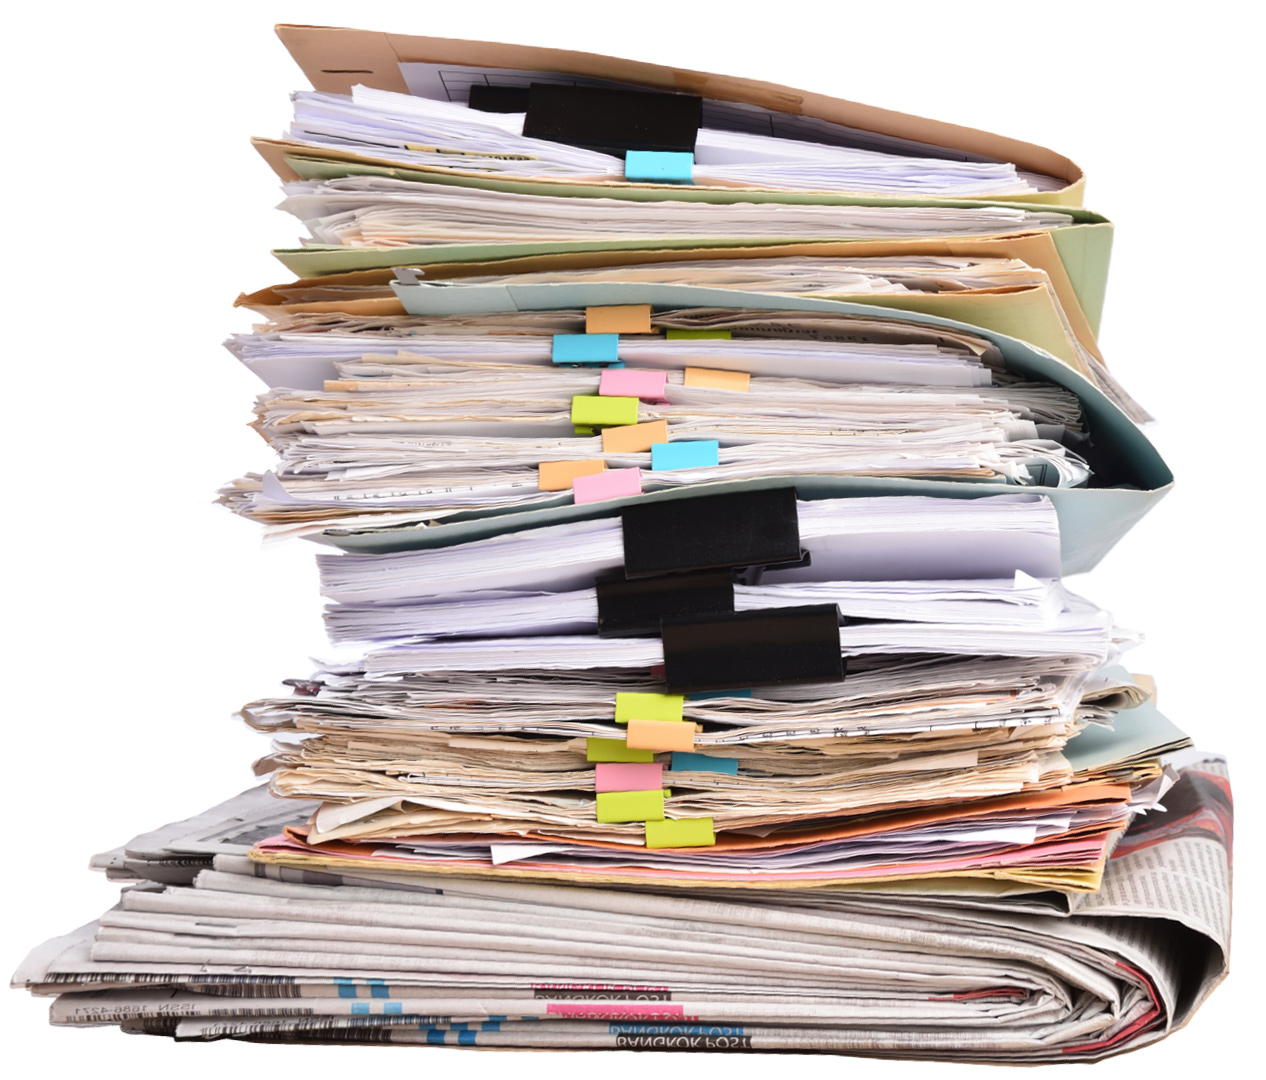 Picture showing messy stacks of paper and newspapers